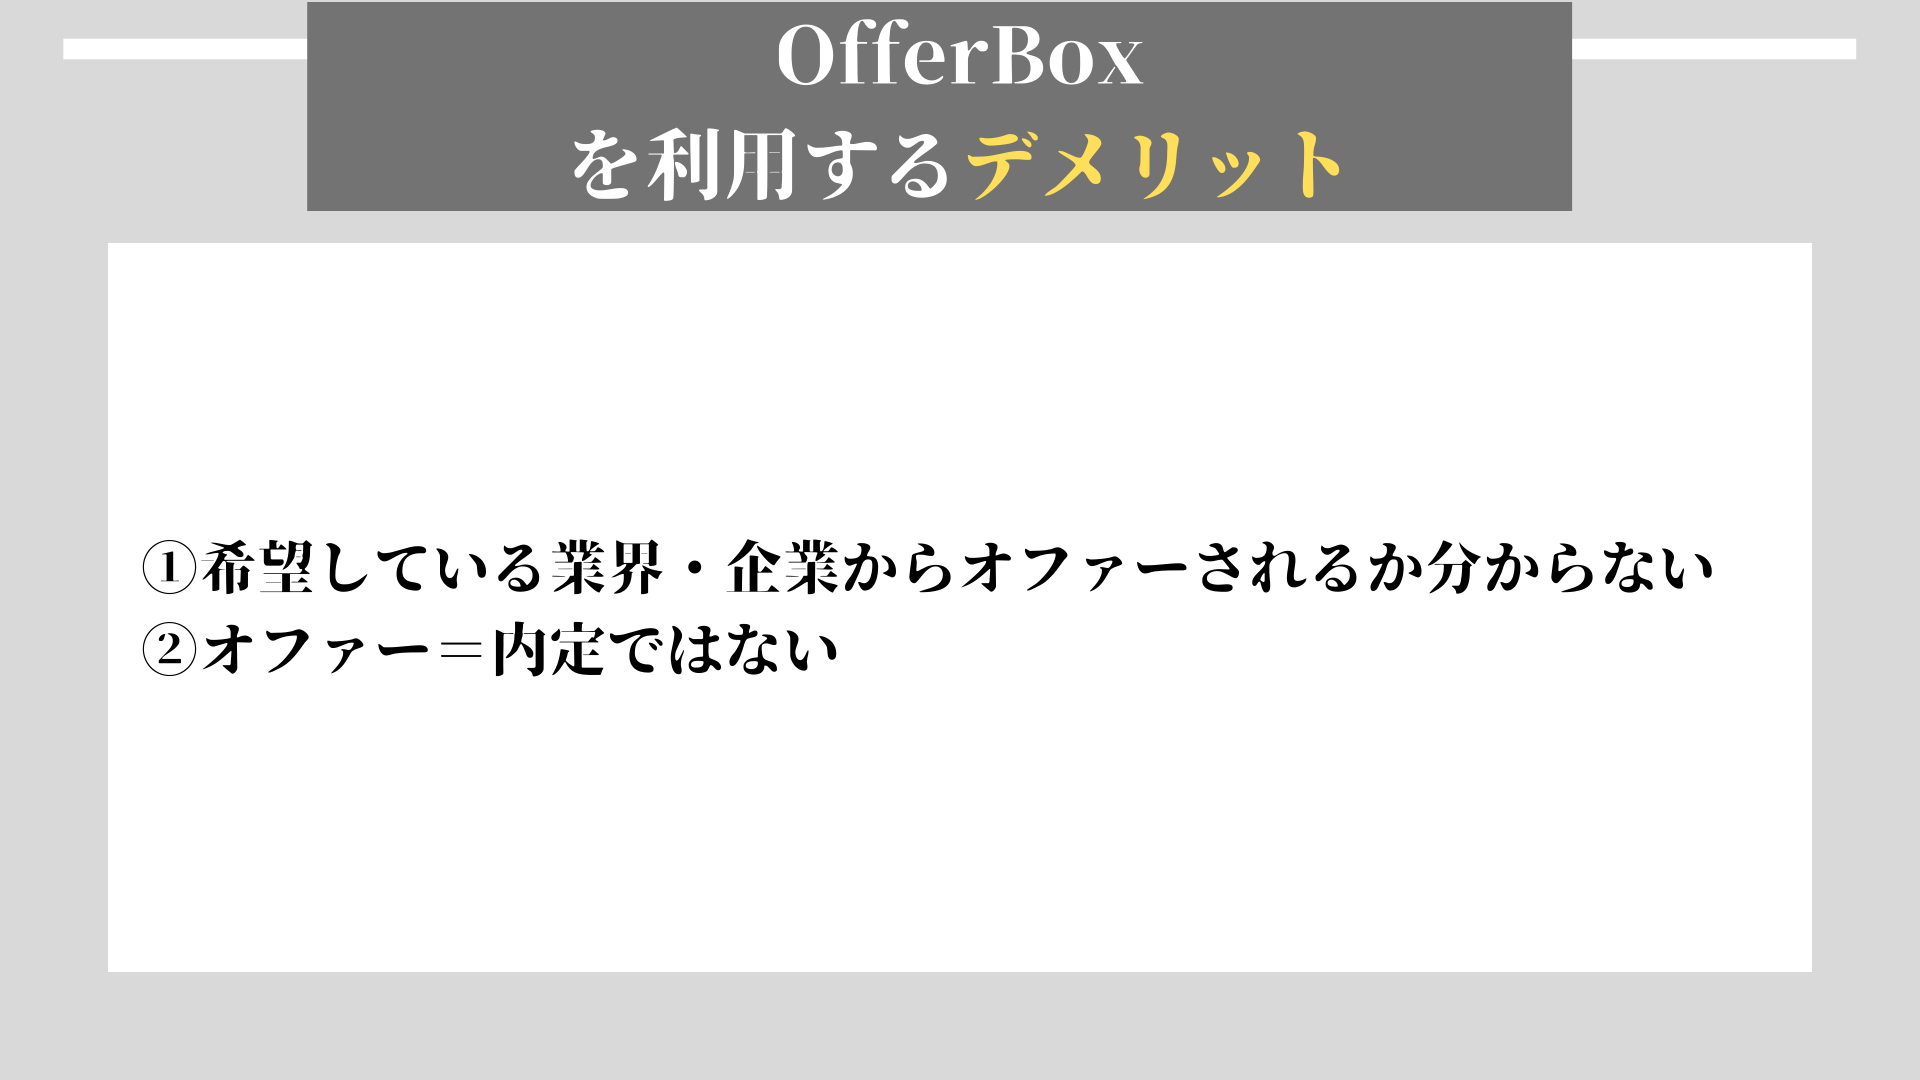 OfferBox デメリット